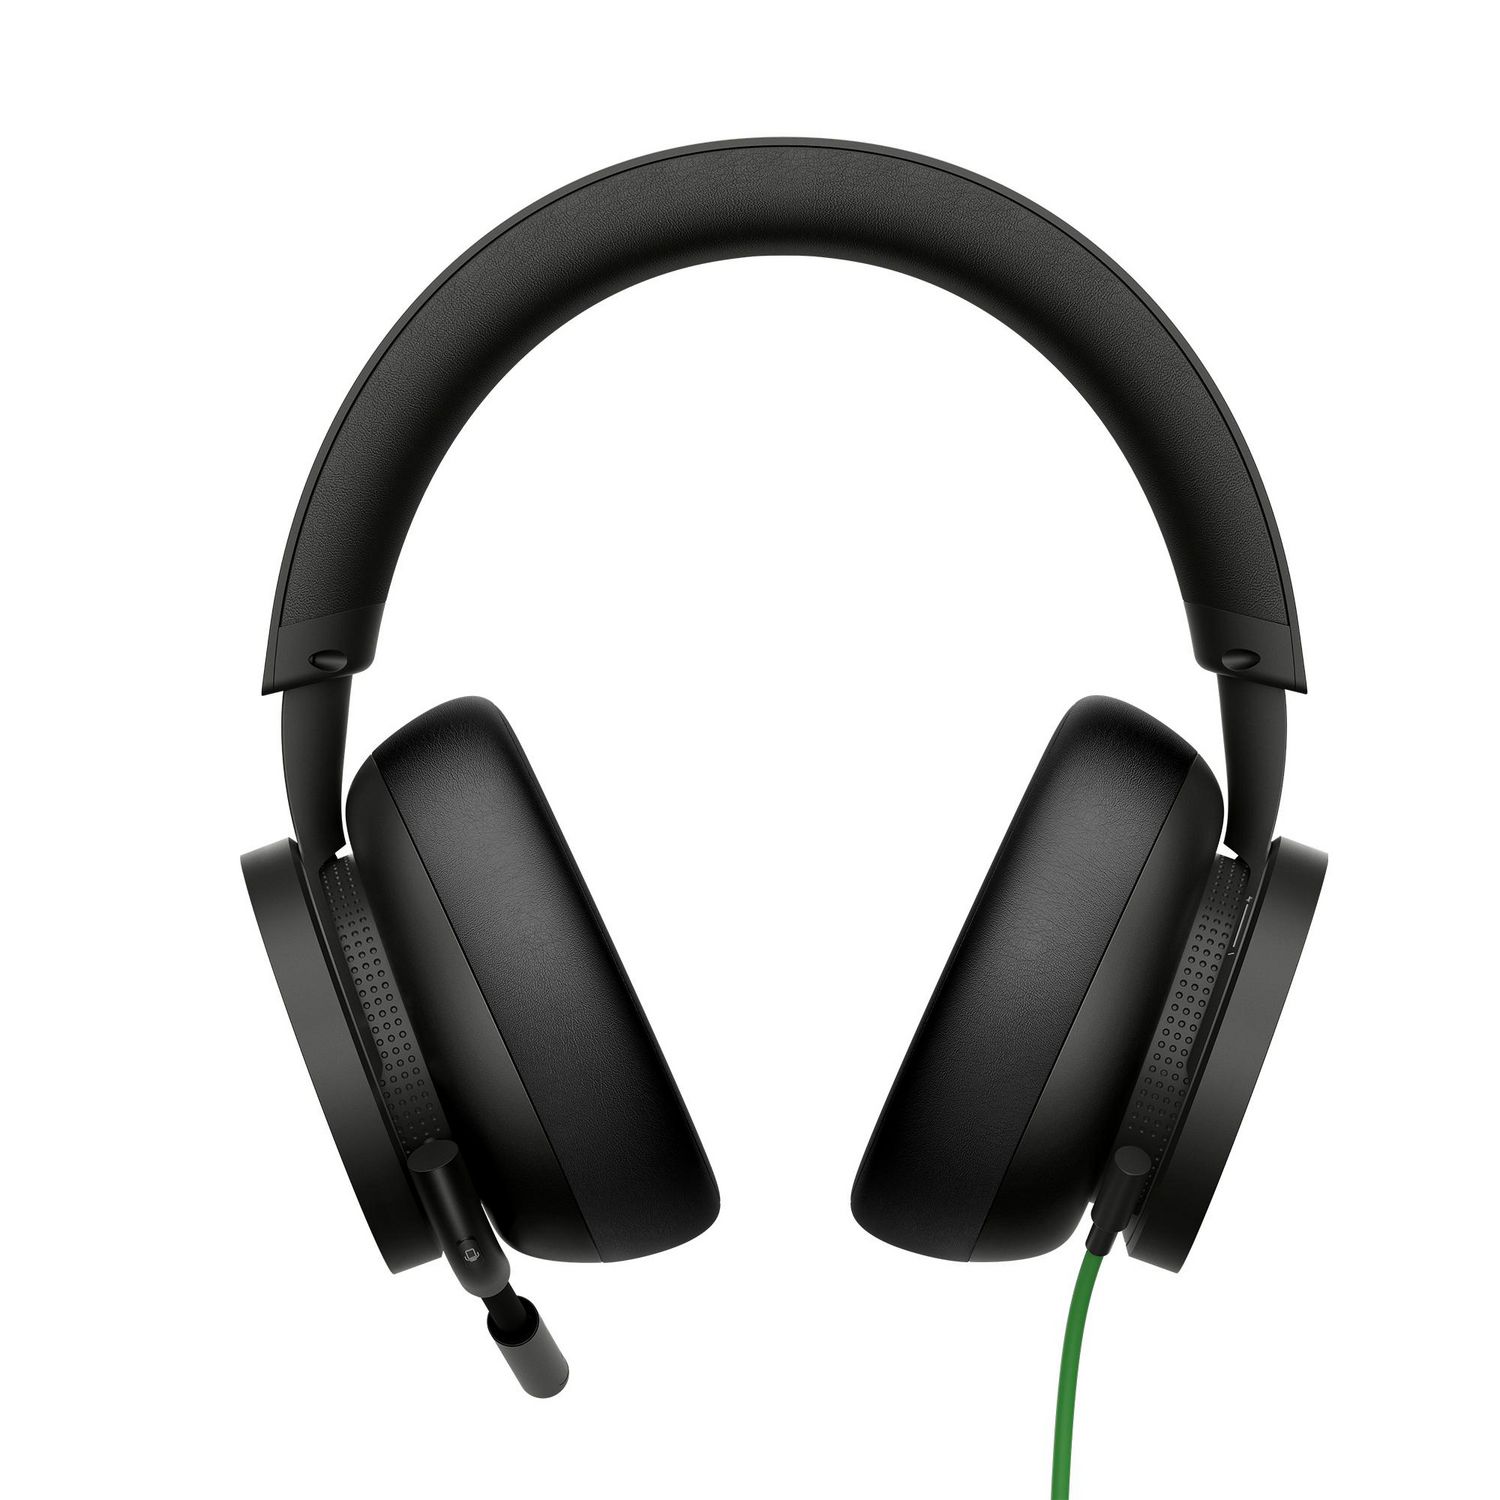 Xbox Stereo Headset for Xbox Series X|S, Xbox One, and Windows 10